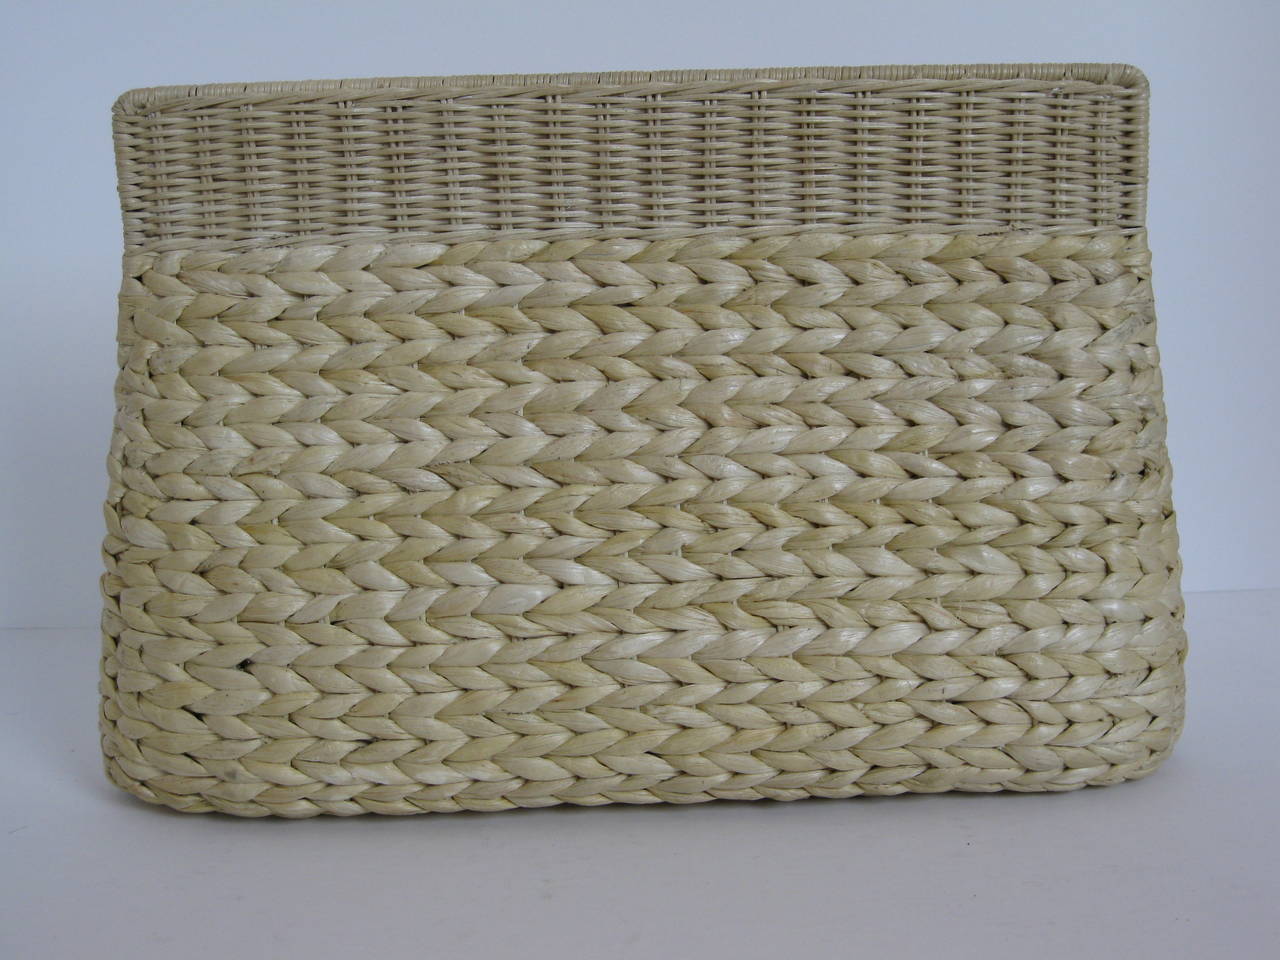 New, never worn straw clutch bag by Kara Ross.
Hidden magnetic closure with a faceted Mother of Pearl buckle.  
A chain shoulder strap is tucked away on the inside with an 11.5